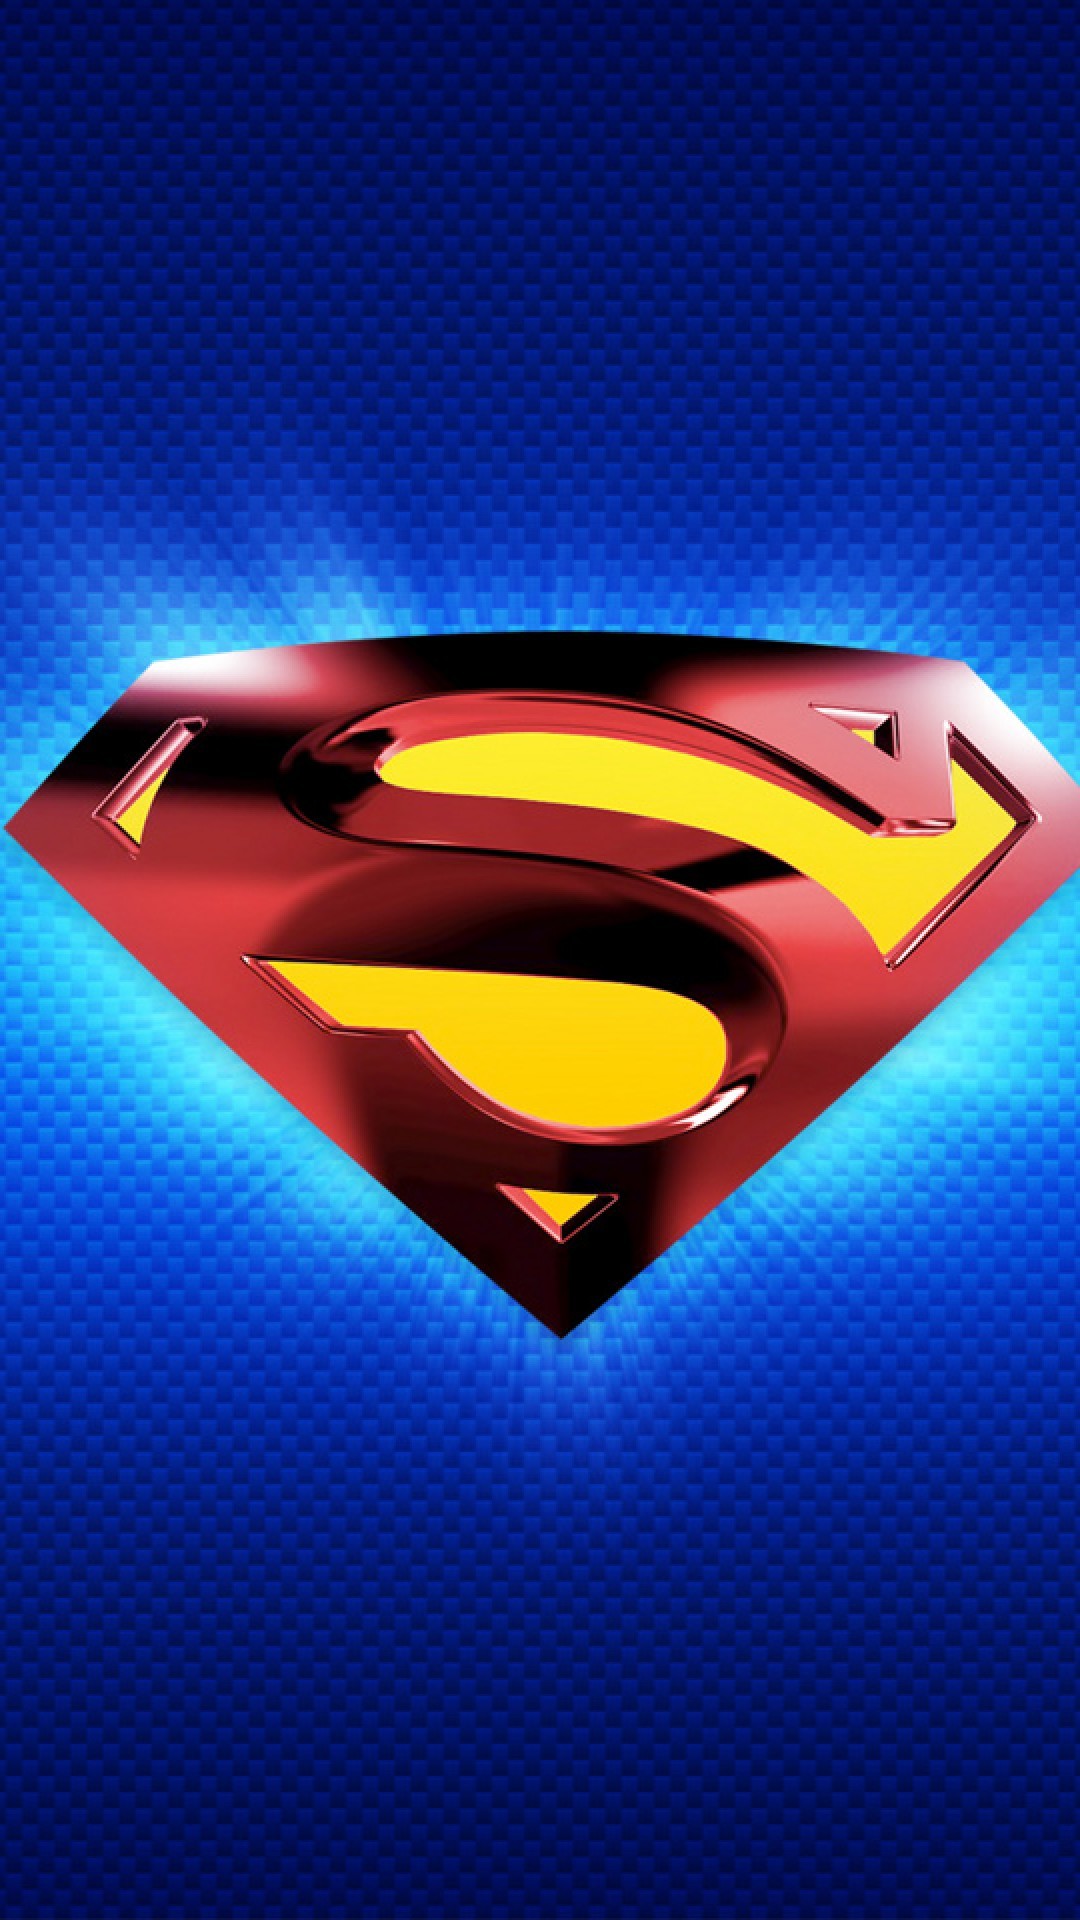 Superman Logo Free HD Wallpapers for iPhone is be the best of HD wallpapers for iPhone and Android Phone